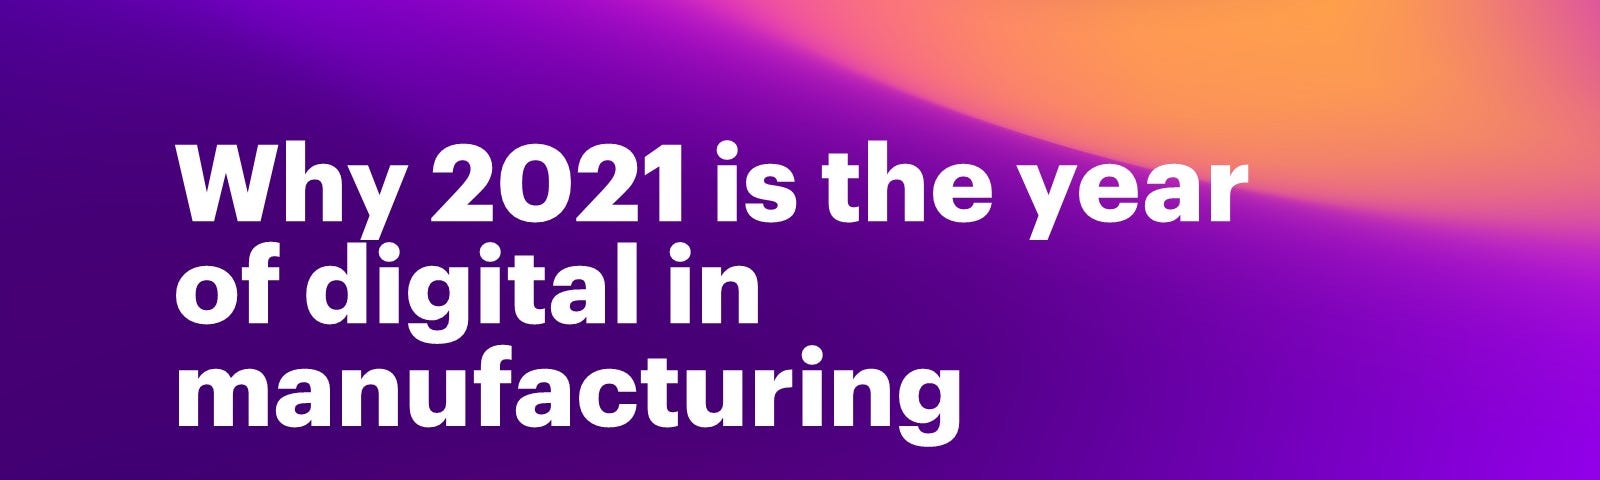 Why 2021 is the year of digital in manufacturing — by Bhaskar Ghosh